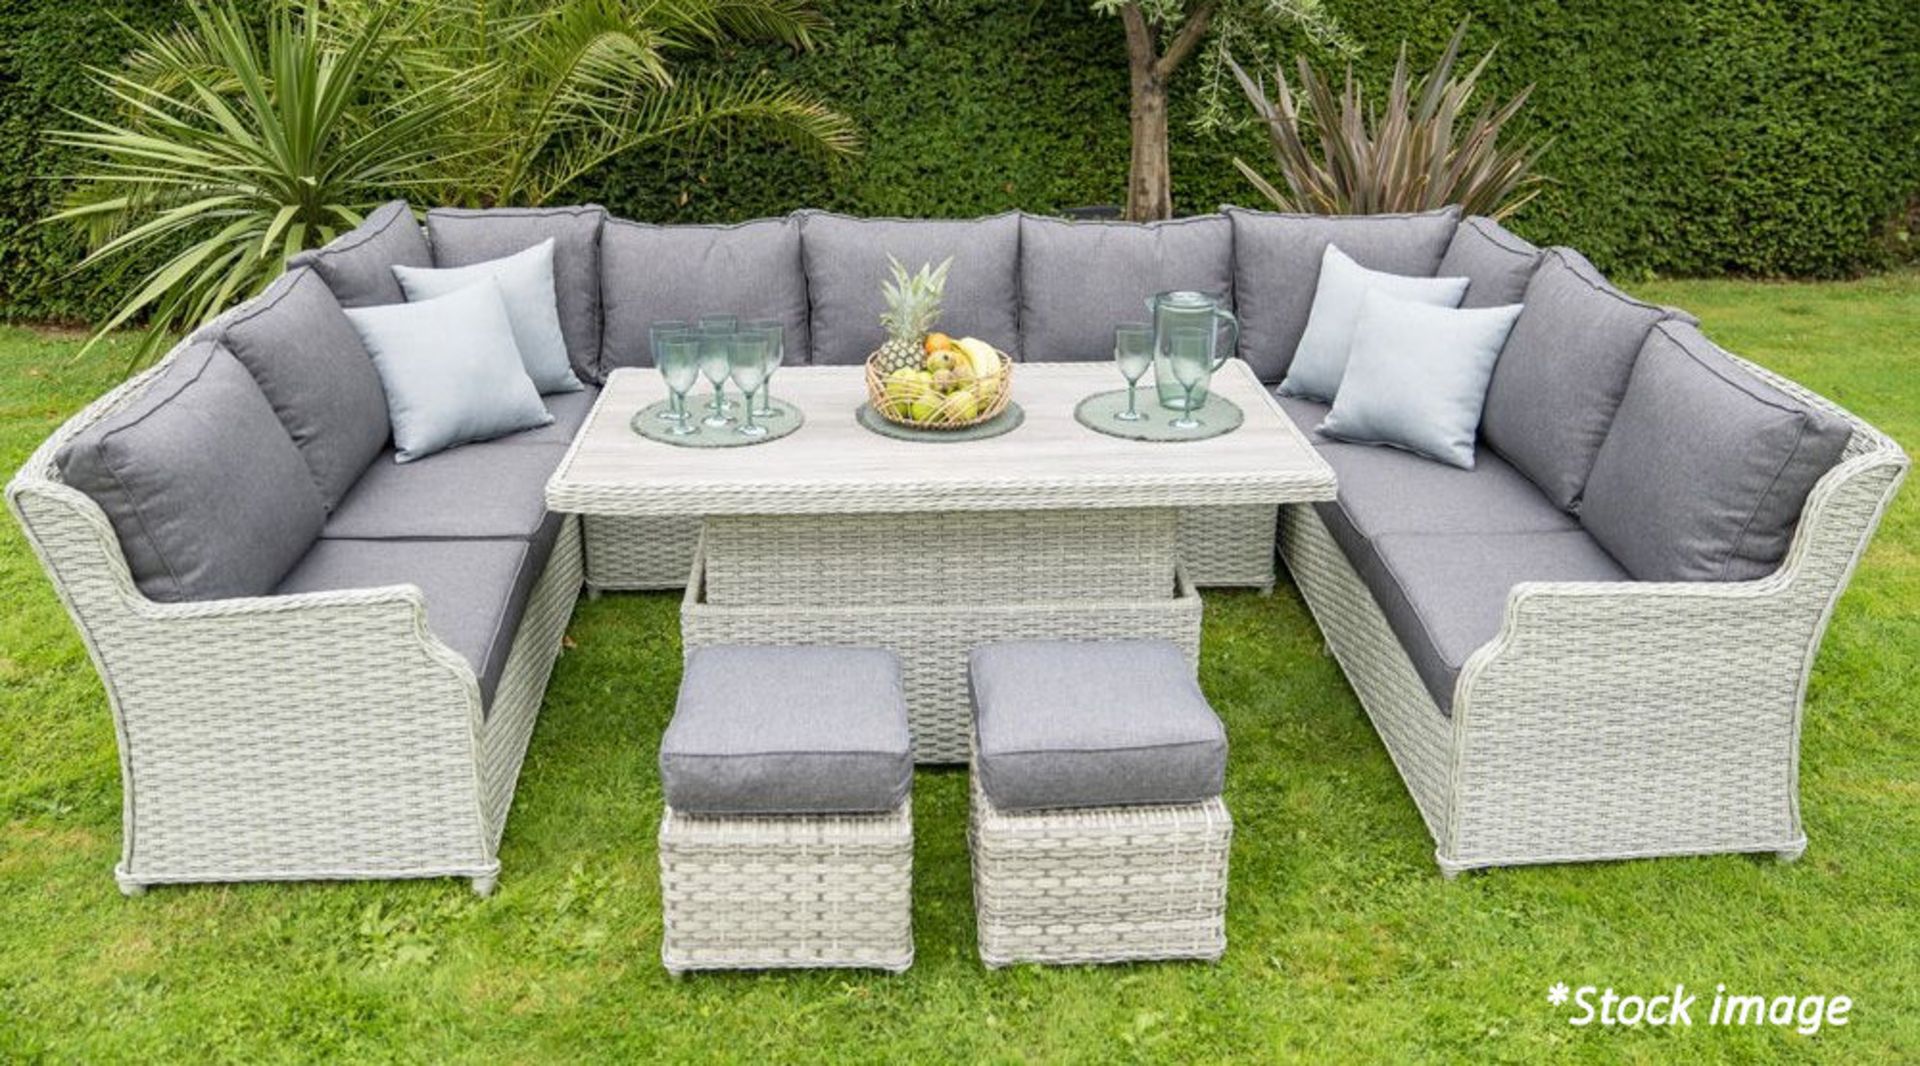 Hartman Hatfield U-Shaped Garden Lounge Set With Height Adjustable Table - New/Boxed - RRP £3,399.99 - Image 21 of 27